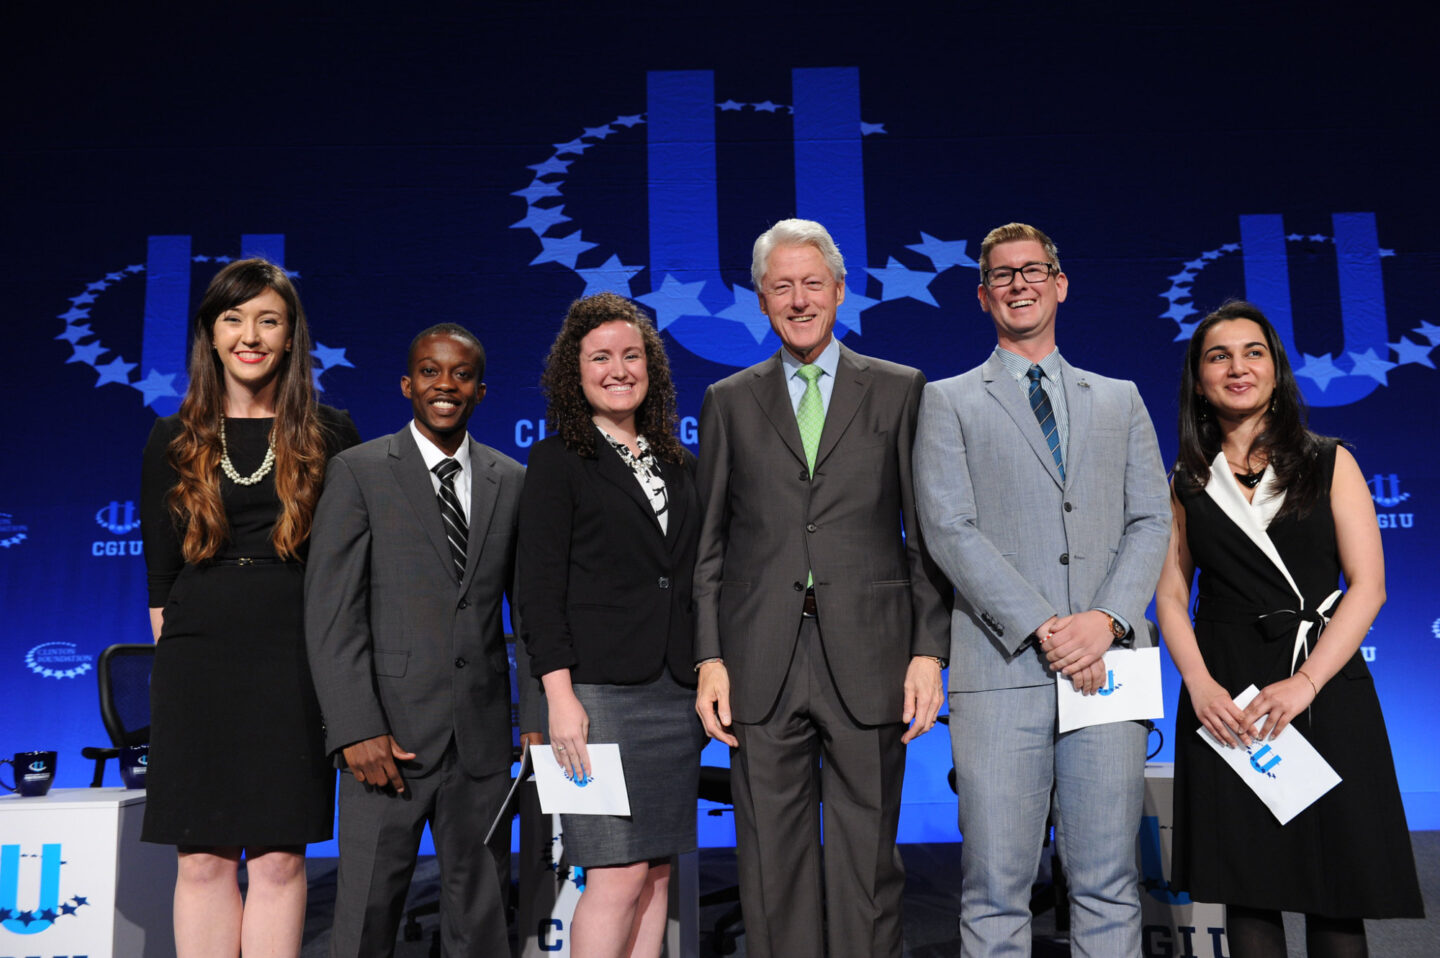 President Clinton takes a photo with student commitment-makers on stage